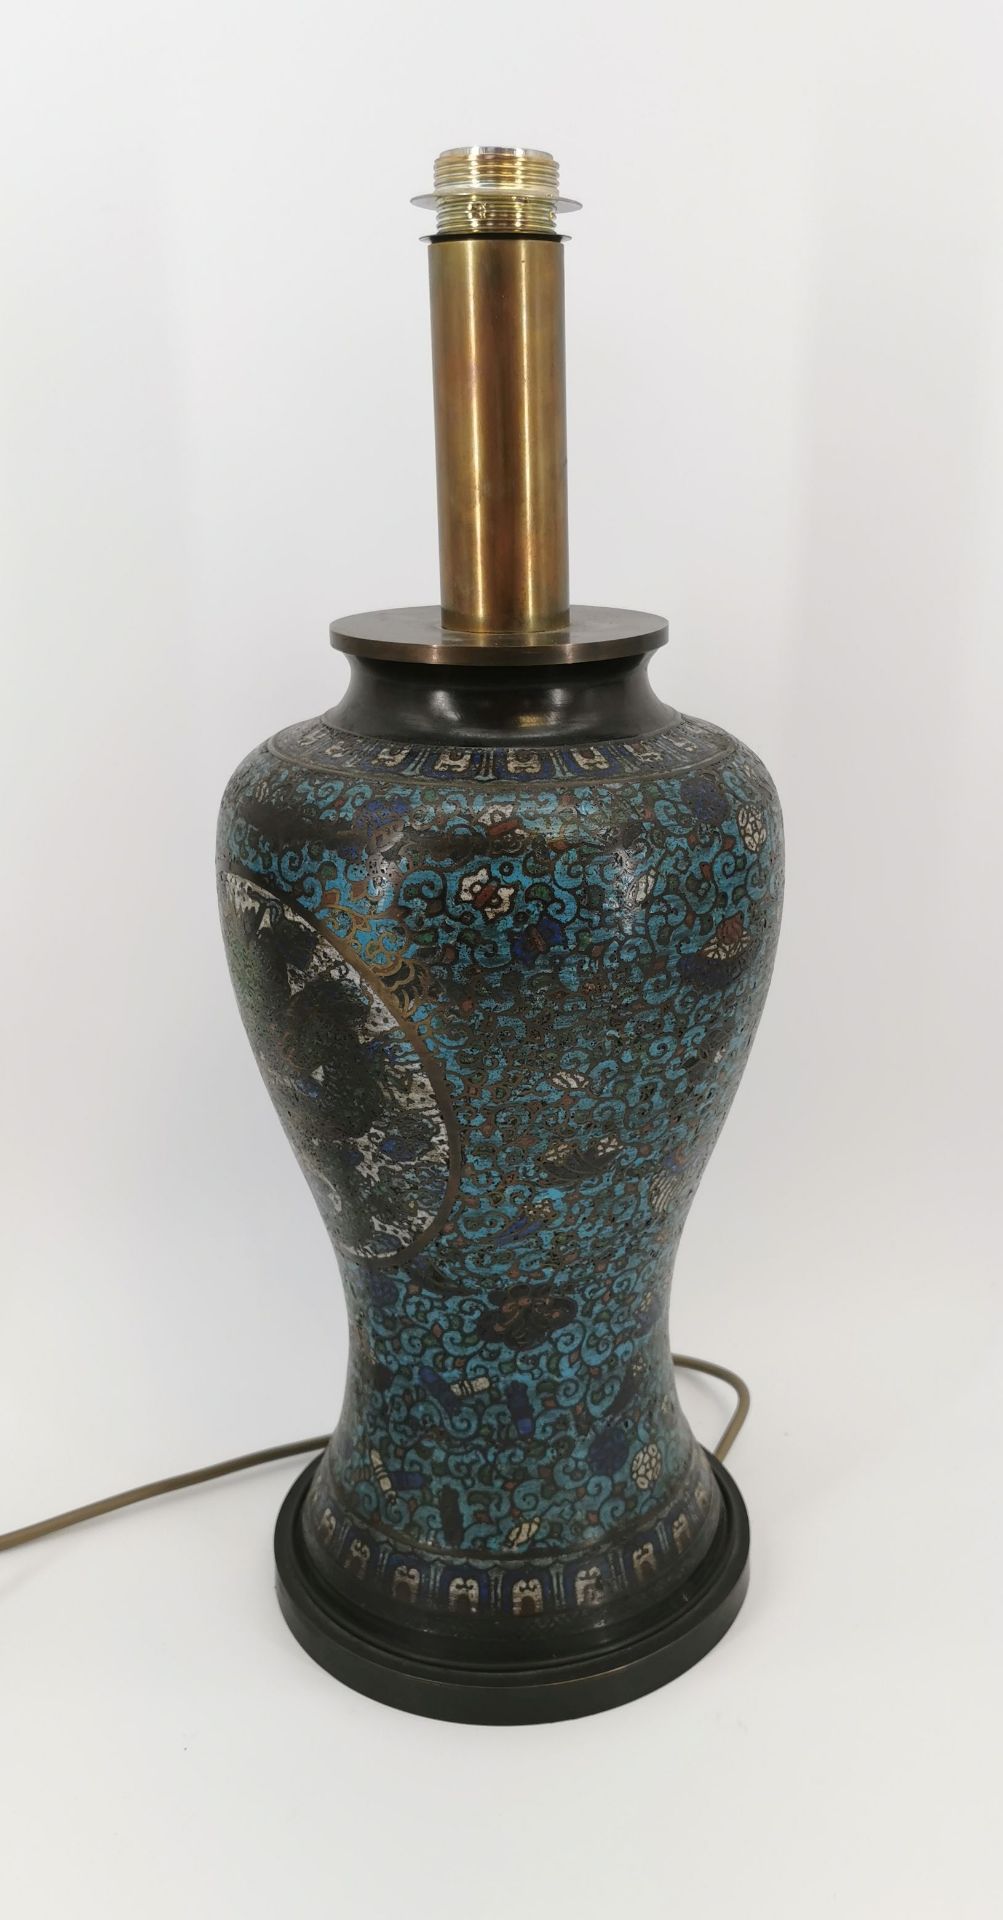 LAMP WITH CLOISONNE SHAFT - Image 3 of 4